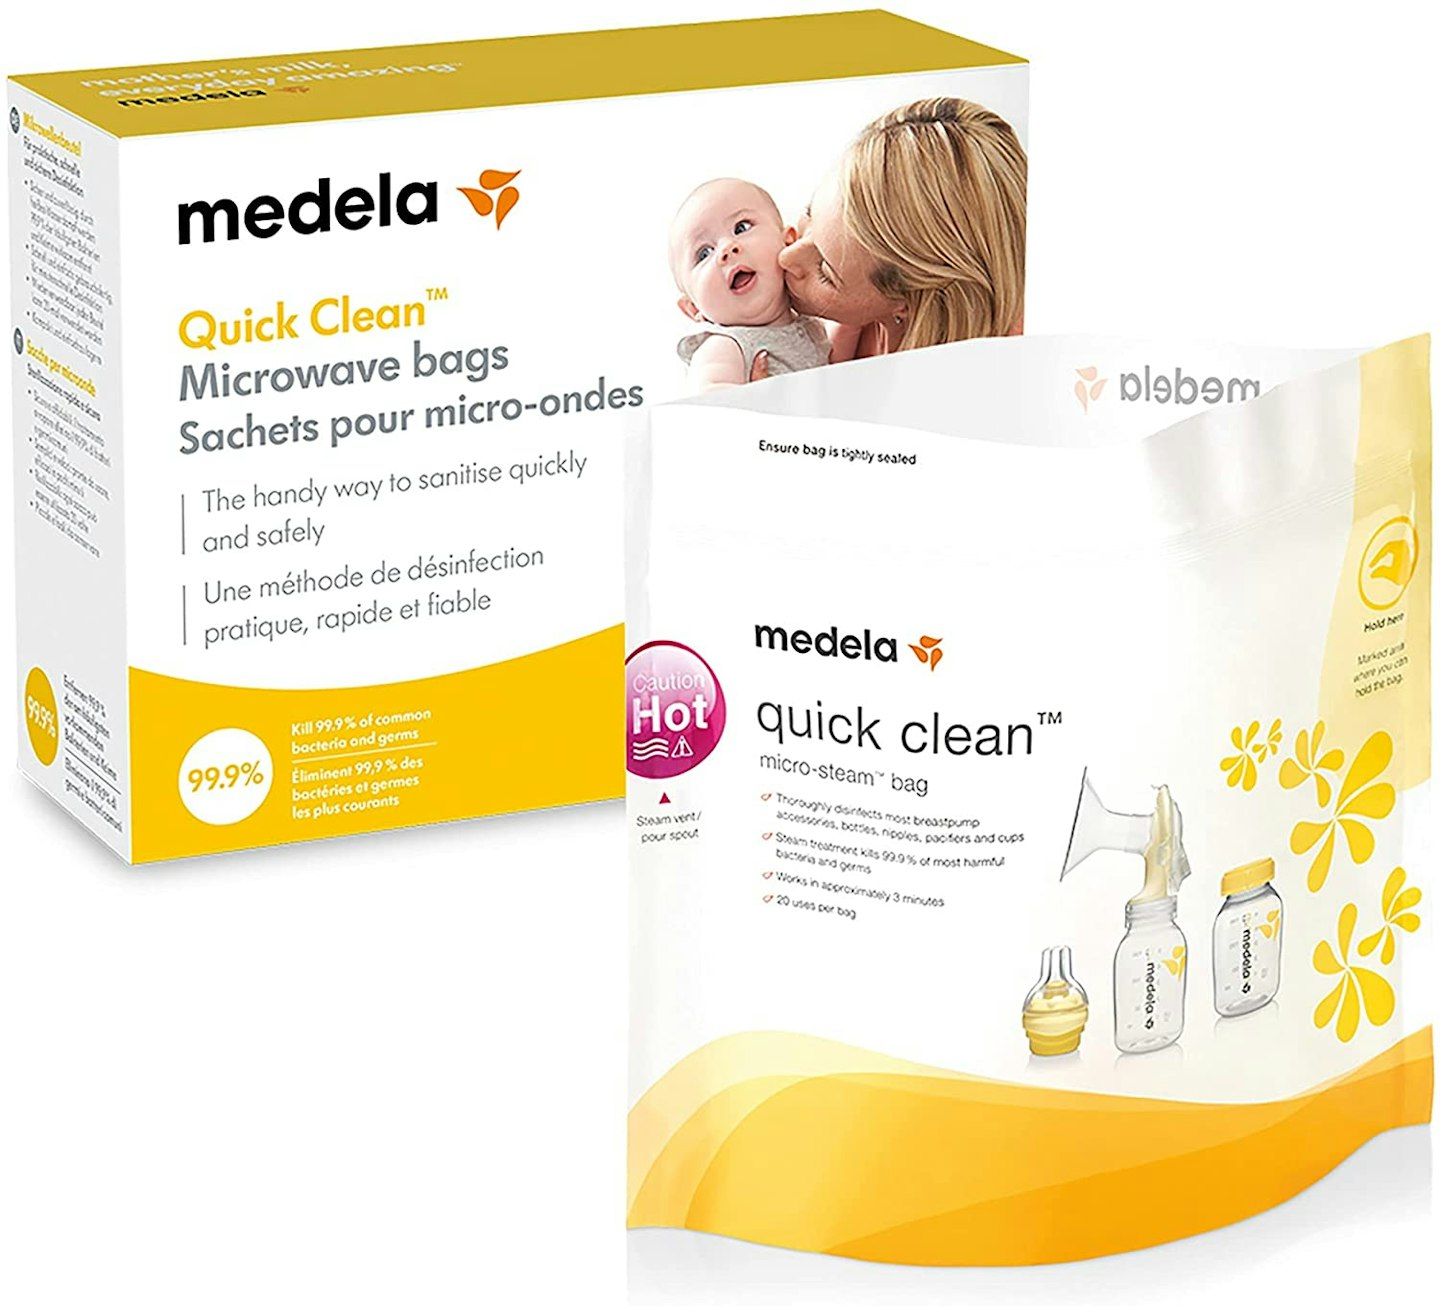 Medela Medela Quick Clean Micro-Steam Bags, 12 Count Sterilizing Bags for  Bottles and Breast Pump Parts 